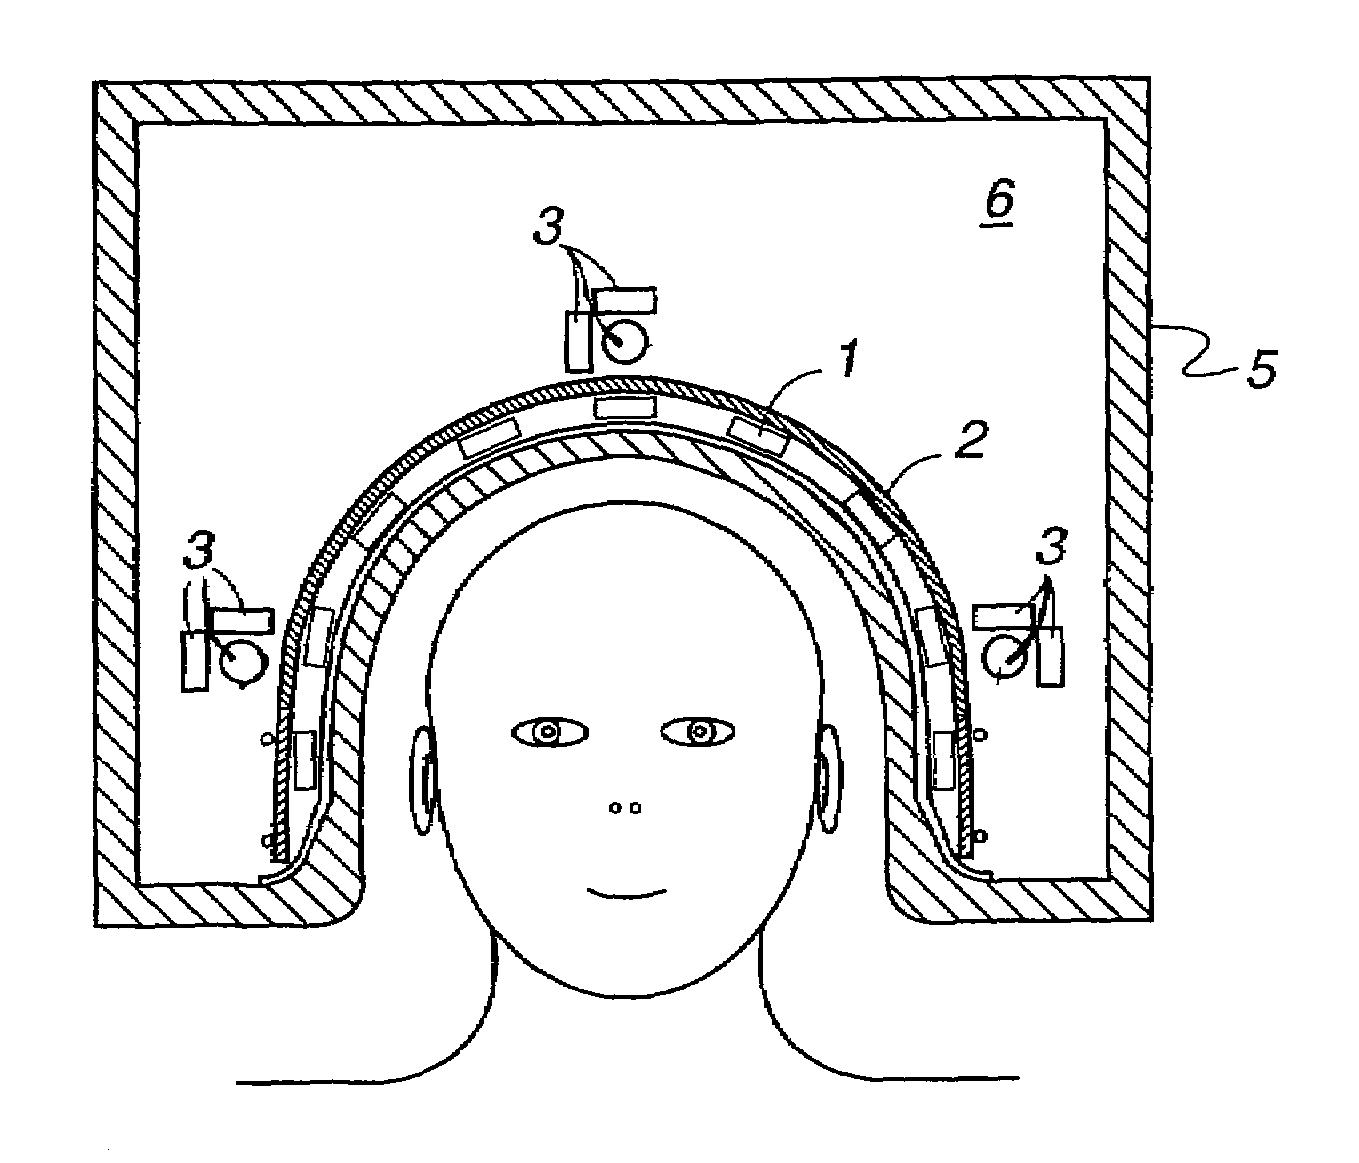 Noise cancellation in magnetoencephalography and electroencephalography with isolated reference sensors